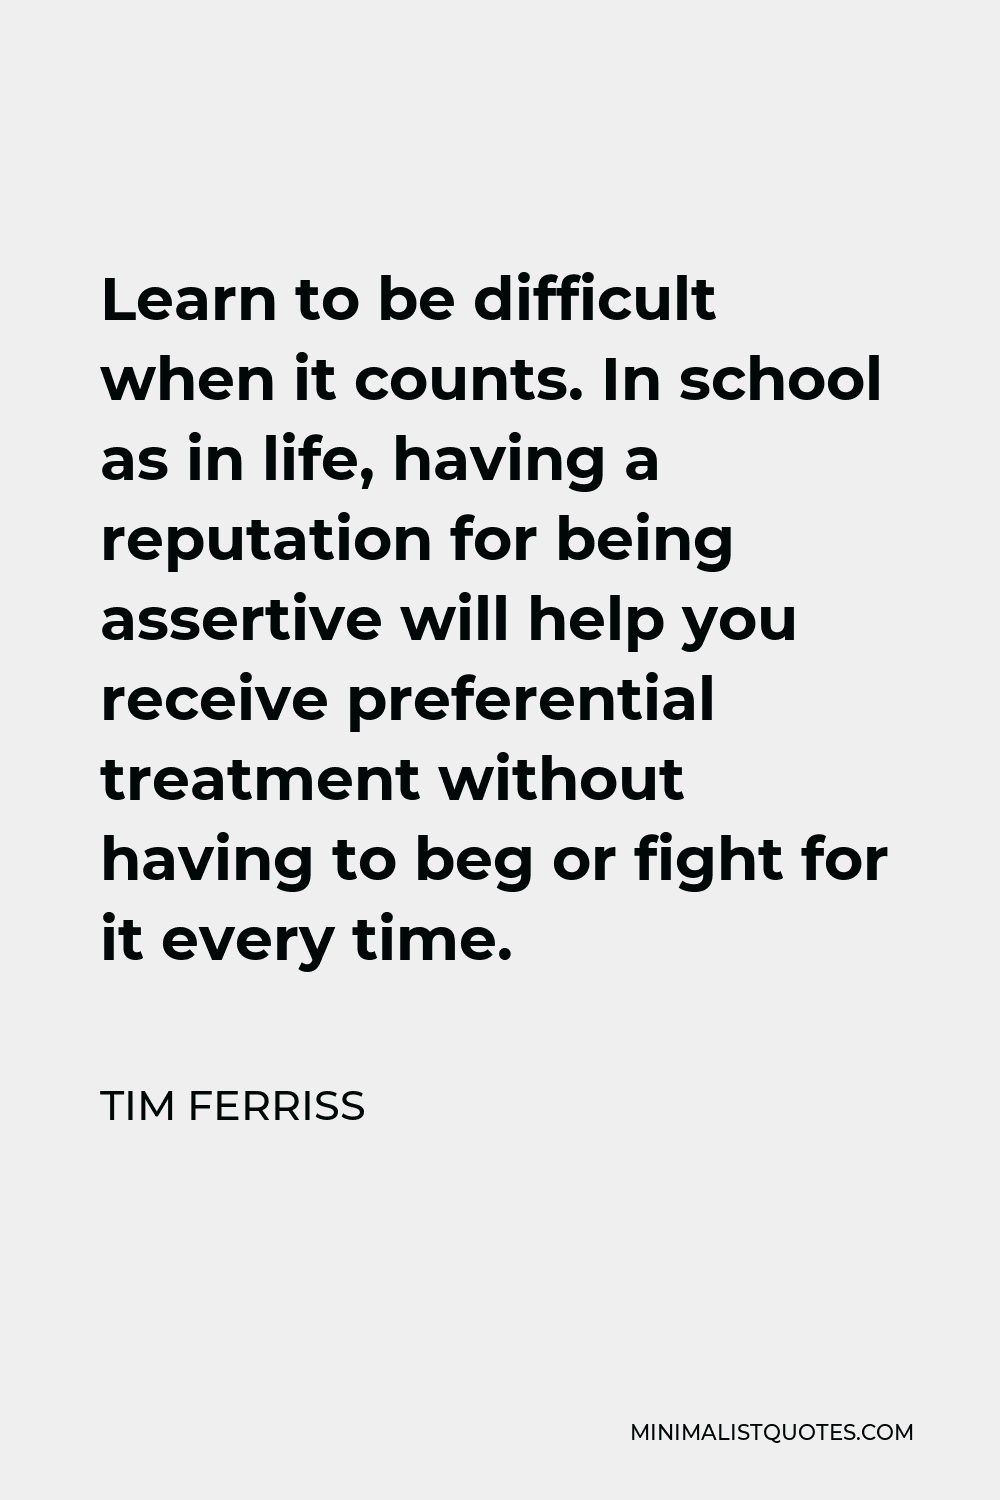 Tim Ferriss Quote - Learn to be difficult when it counts. In school as in life, having a reputation for being assertive will help you receive preferential treatment without having to beg or fight for it every time.